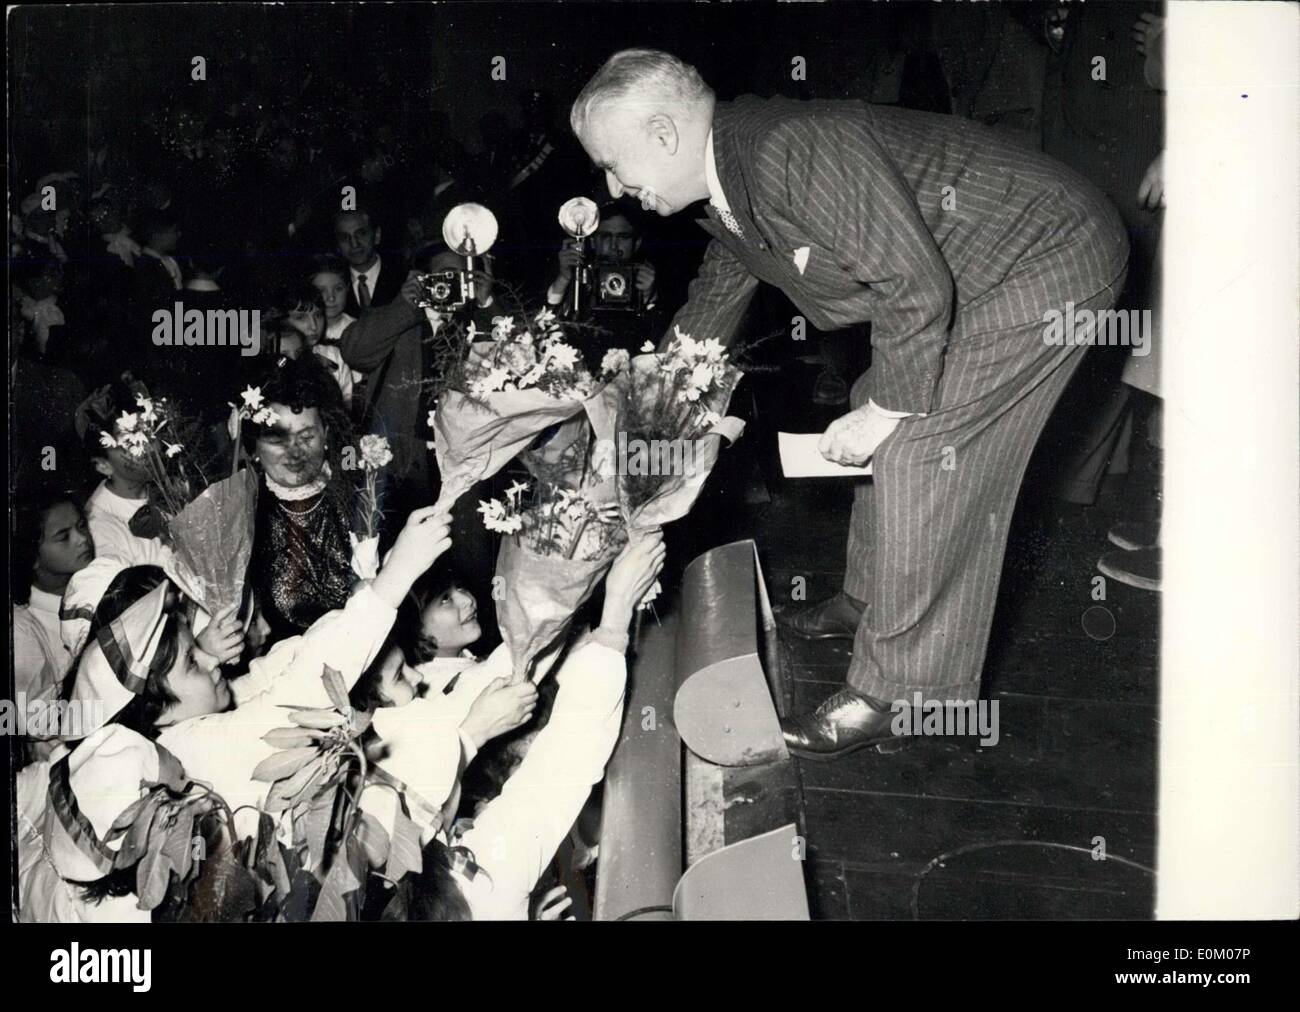 Dec. 21, 1952 - Charlie Chaplin pressences at performance: Rome December 21st, 1952. Charlie Chaplin has presenced today in Tome at Super cinema picture movies at a performance of his photo play, organized for the children.. Photo shows Charlie Chaplin receives a floreal homage. Stock Photo